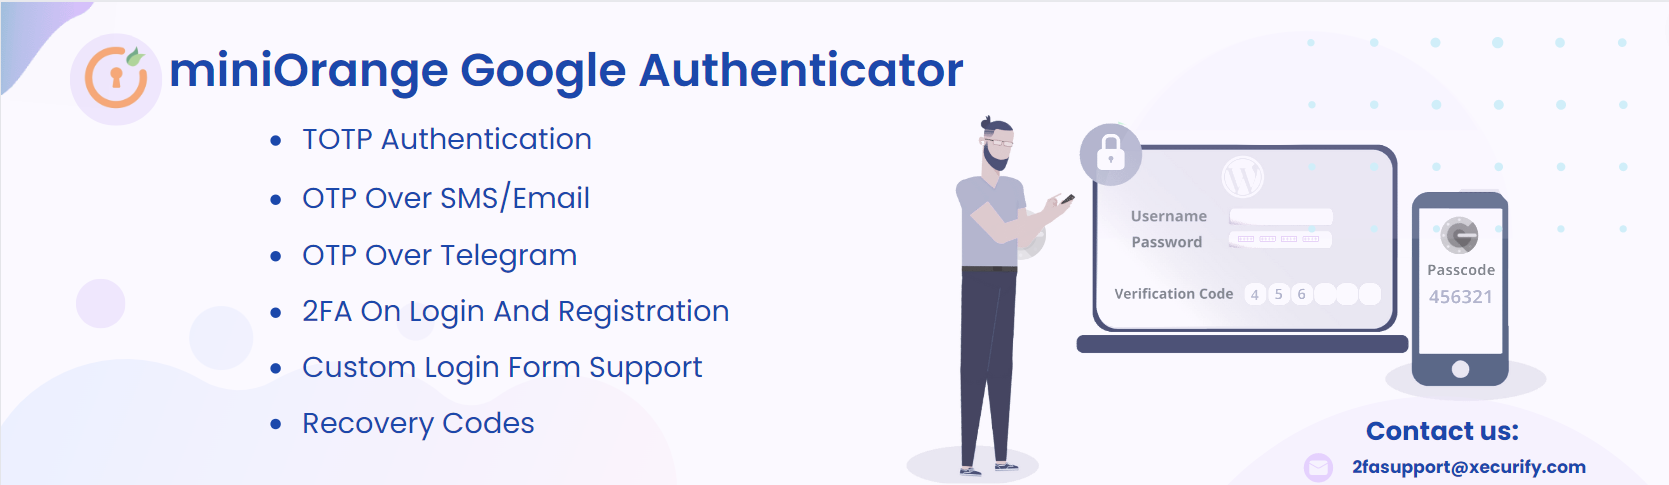 MiniOrange's Google Authenticator – WordPress Two Factor Authentication – 2FA, Two Factor, OTP SMS And Email | Passwordless Login Preview - Rating, Reviews, Demo & Download